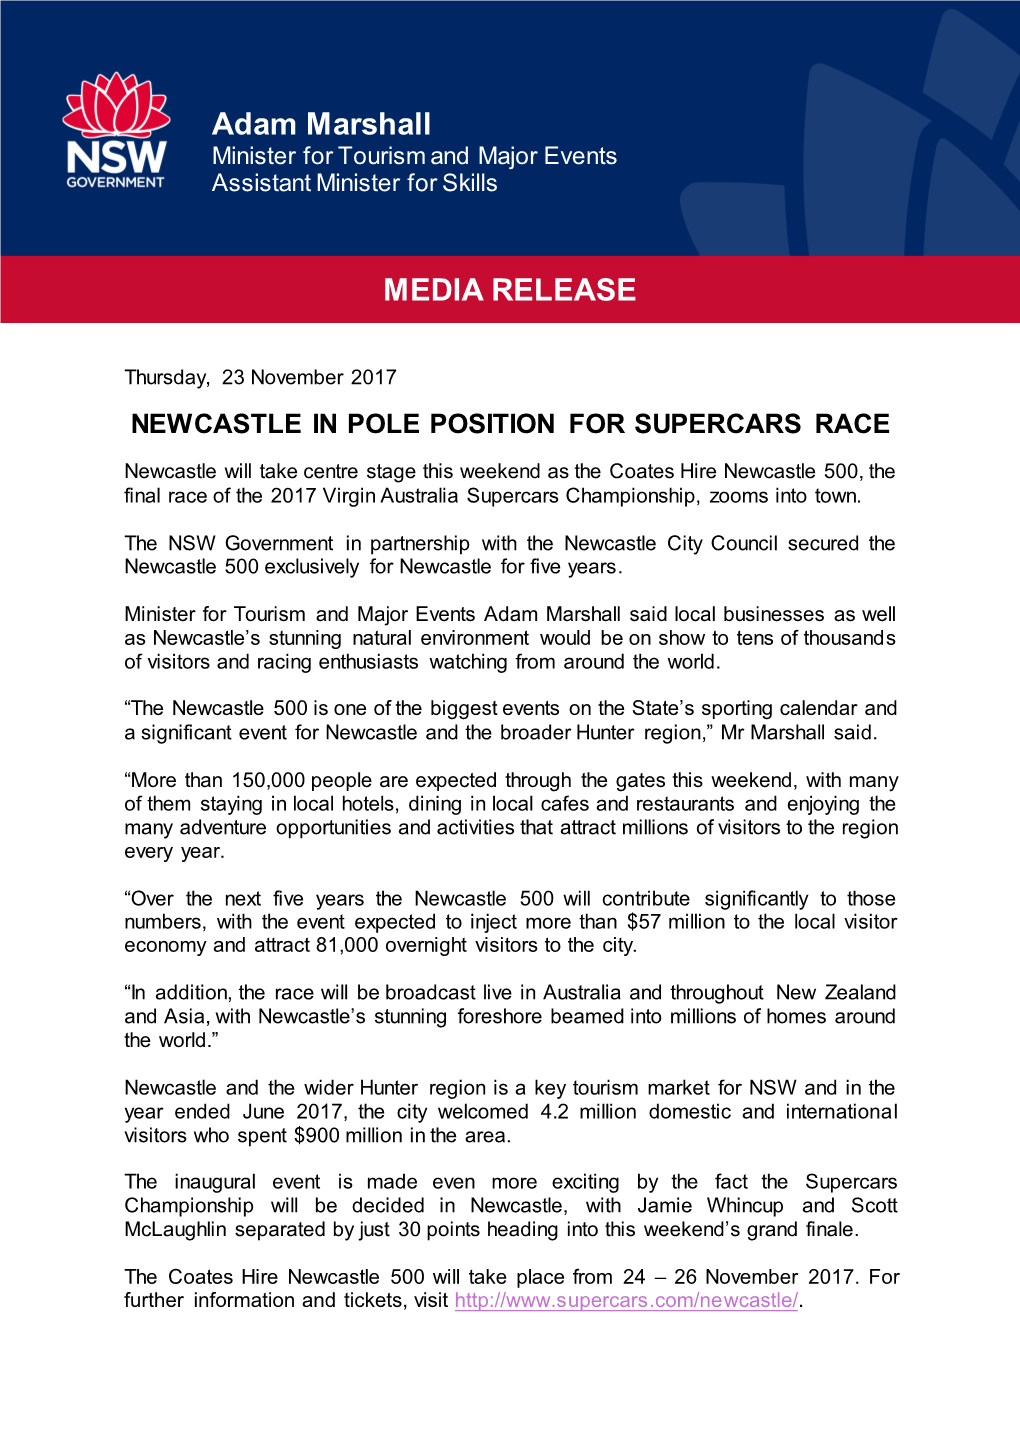 Newcastle in Pole Position for Supercars Race